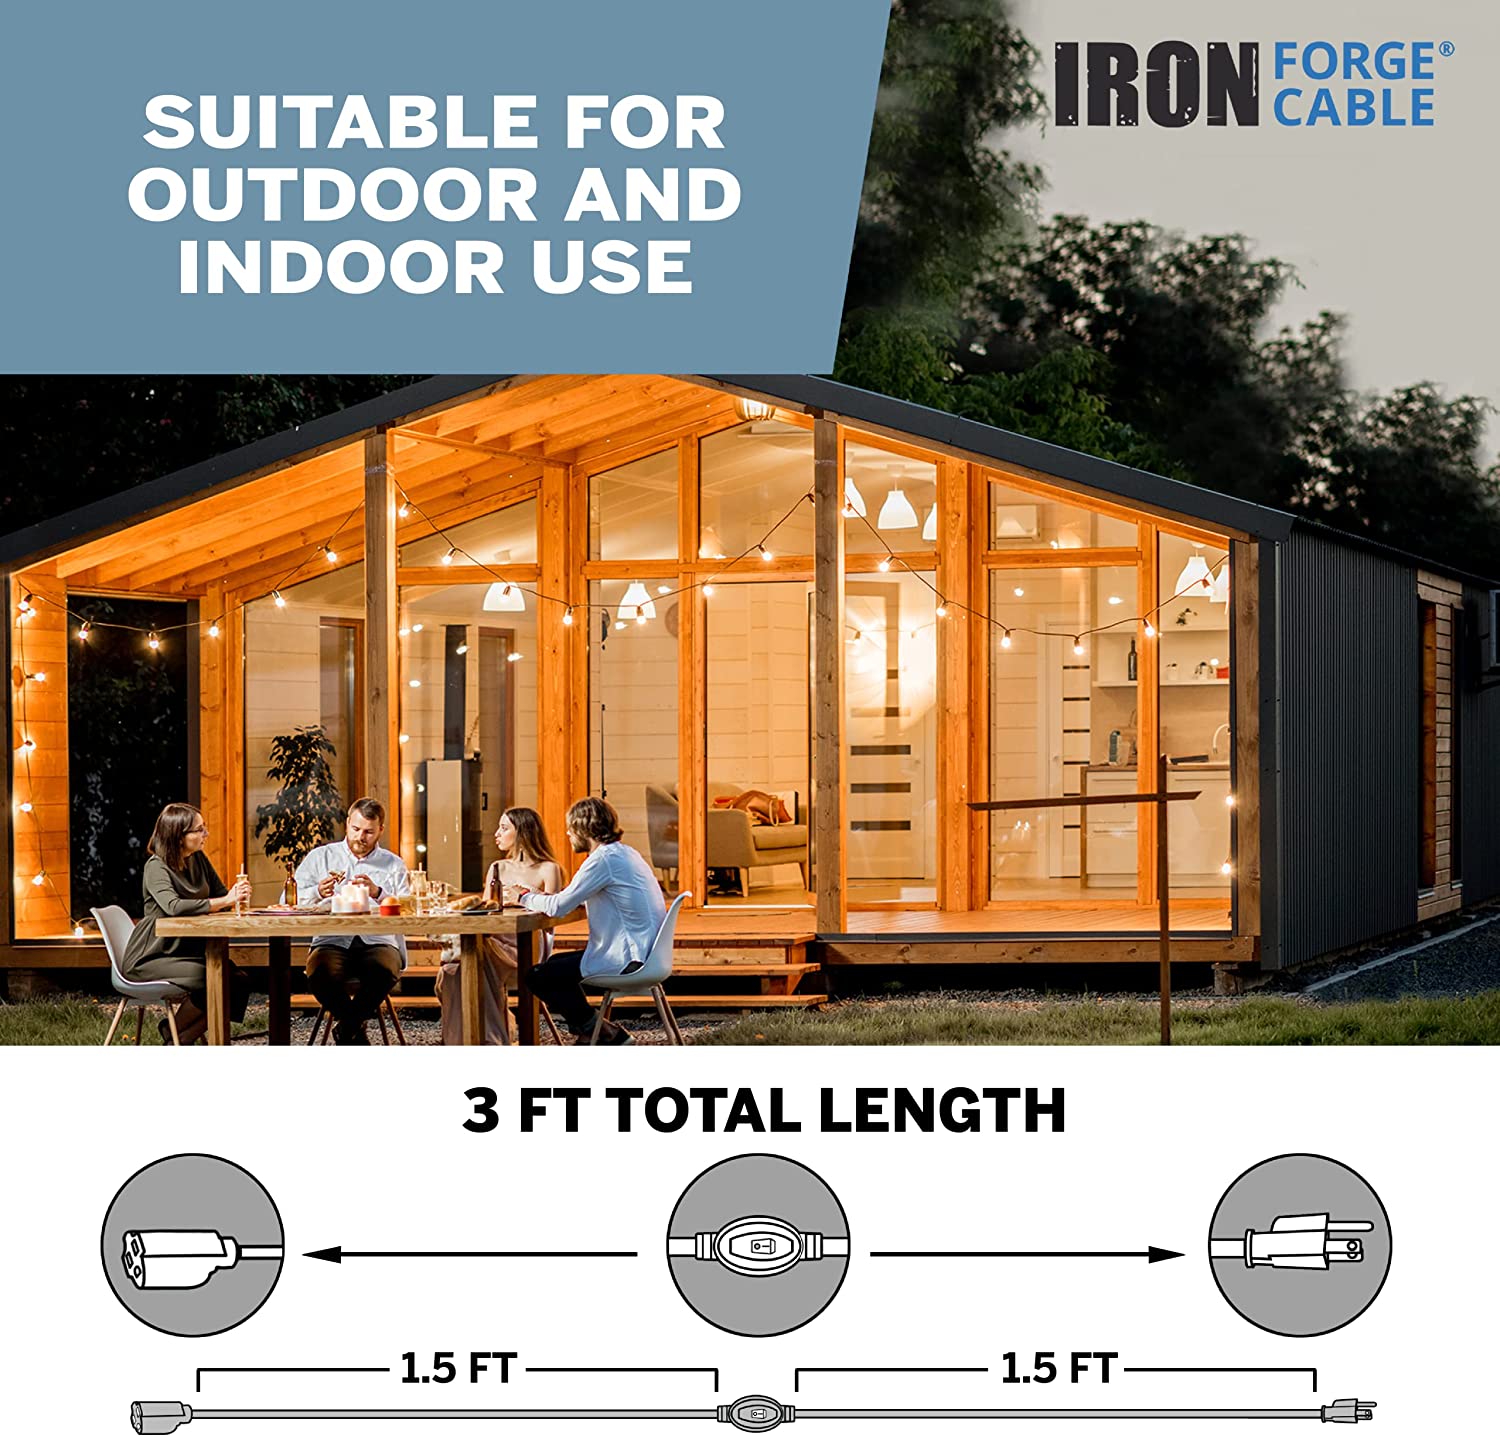 Iron Forge 3 Ft Outdoor Extension Cord with Switch On/Off - 16/3 SJTW 13  Amp Black Cable